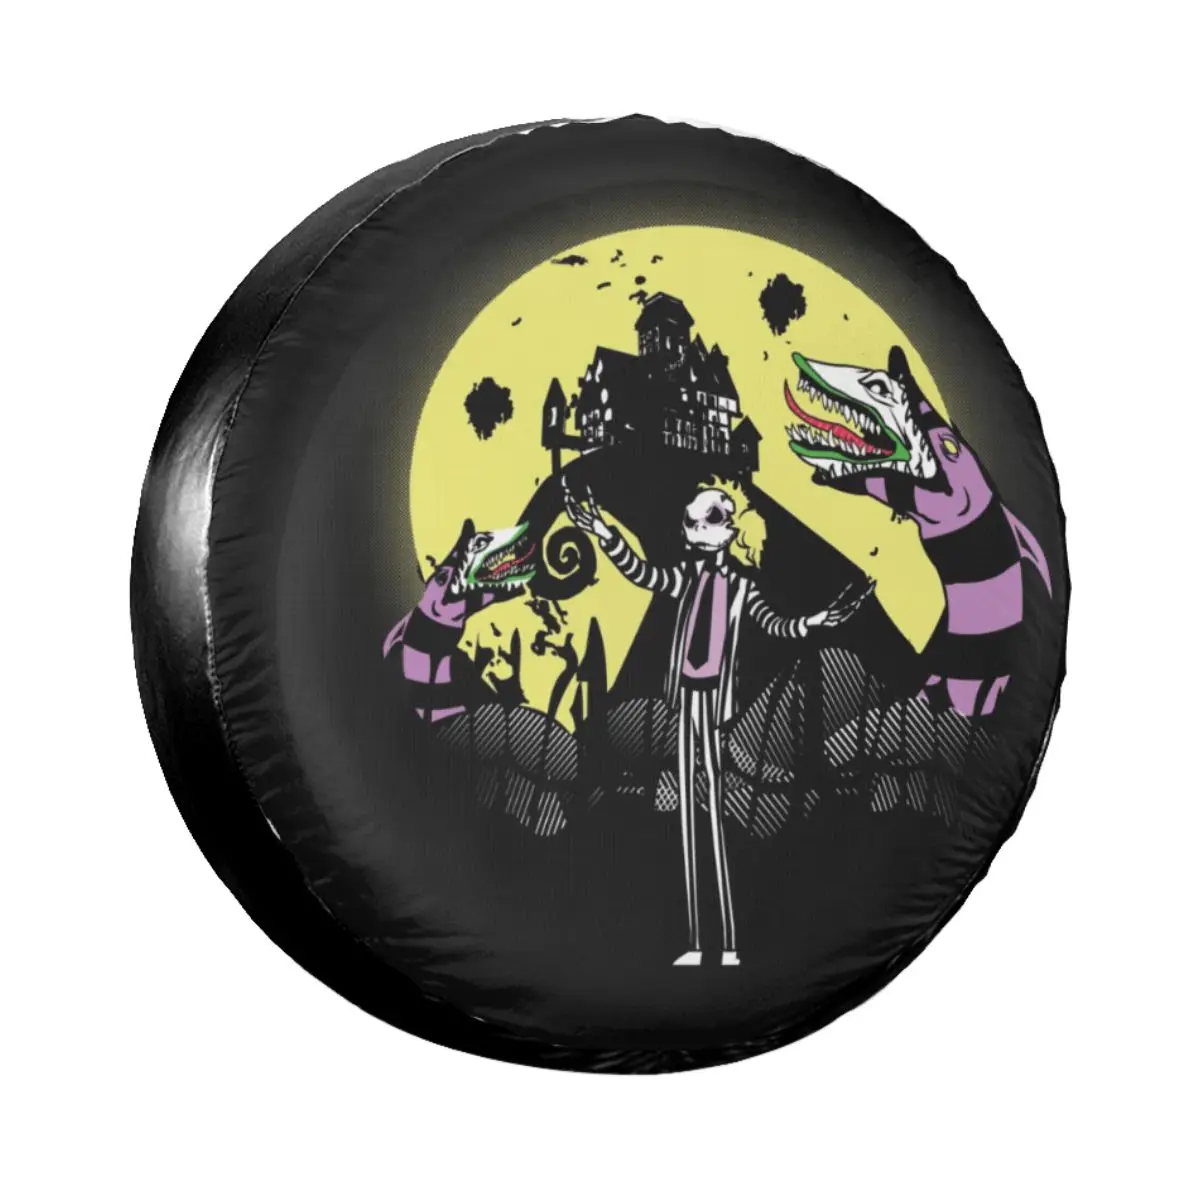 

Bettlejack Revisited Spare Tire Cover for Jeep Mitsubishi Pajero Tim Burton Beetlejuice Car Wheel Protectors Car